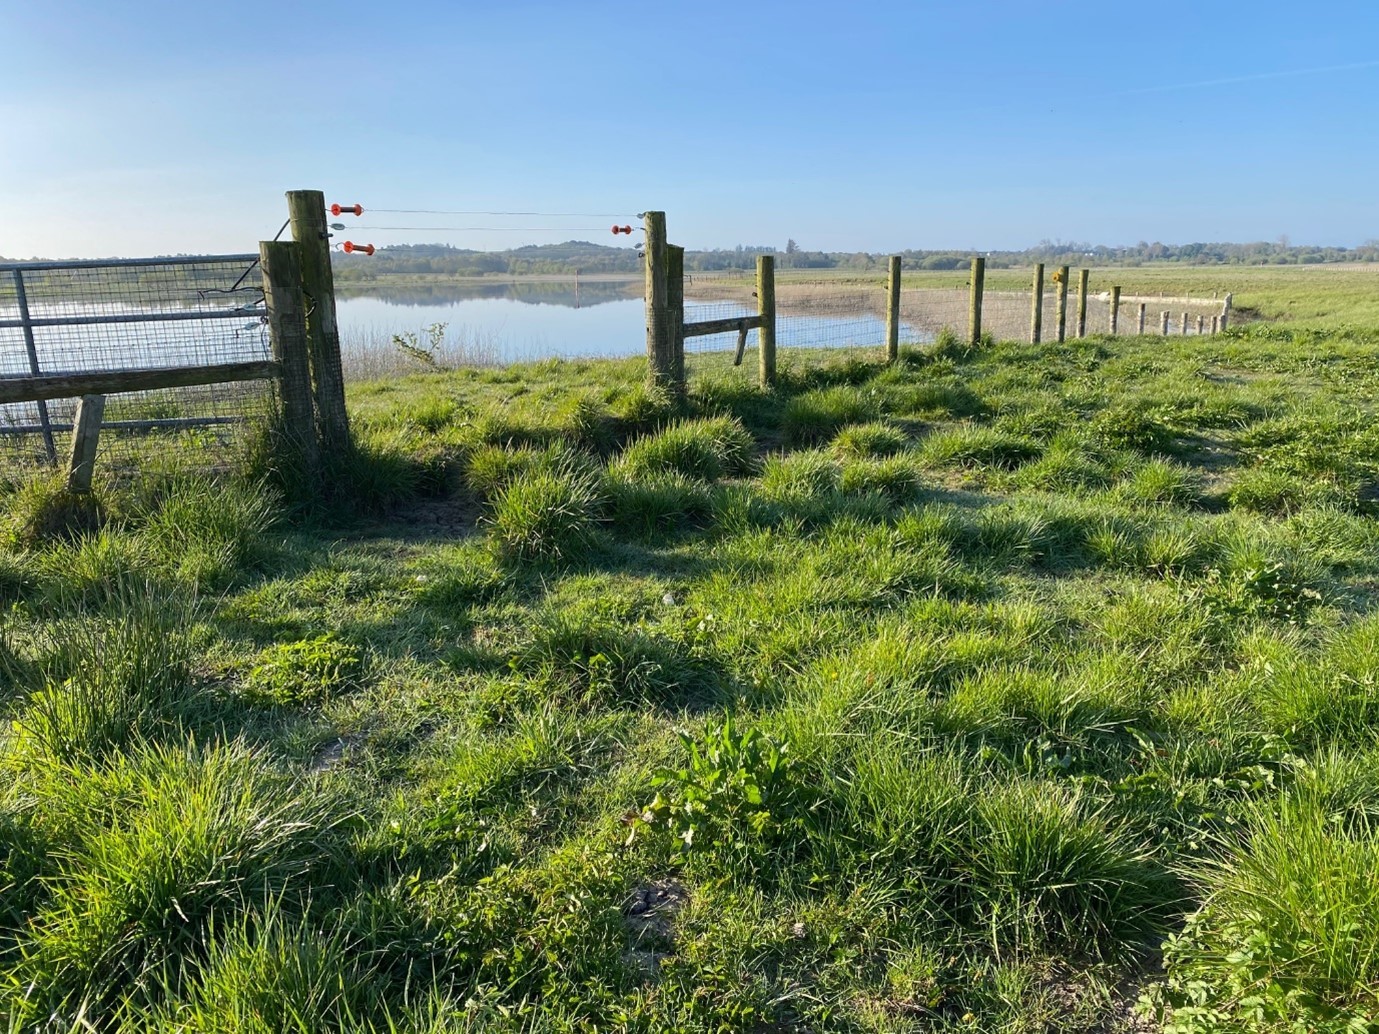 High-quality breeding wader habitat in the Middle Shannon Callows – photo copyright Kendrew Colhoun